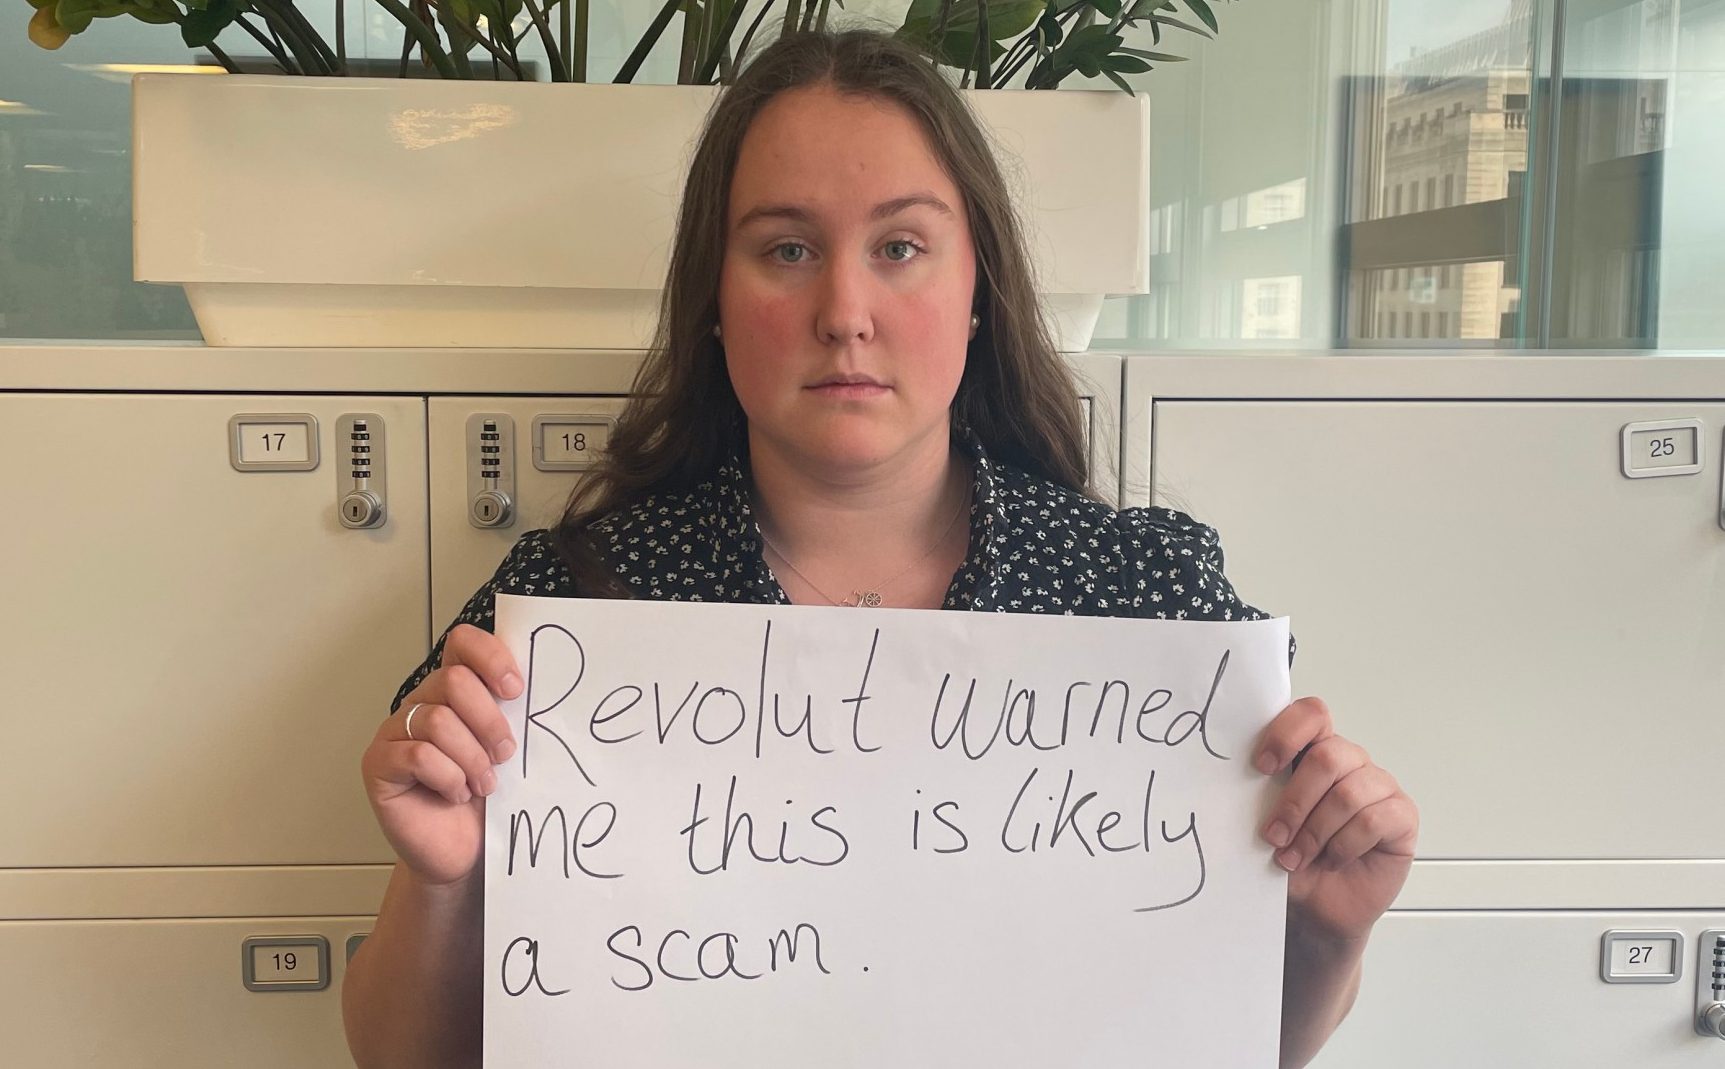 why revolut is asking suspected scam victims to take selfies